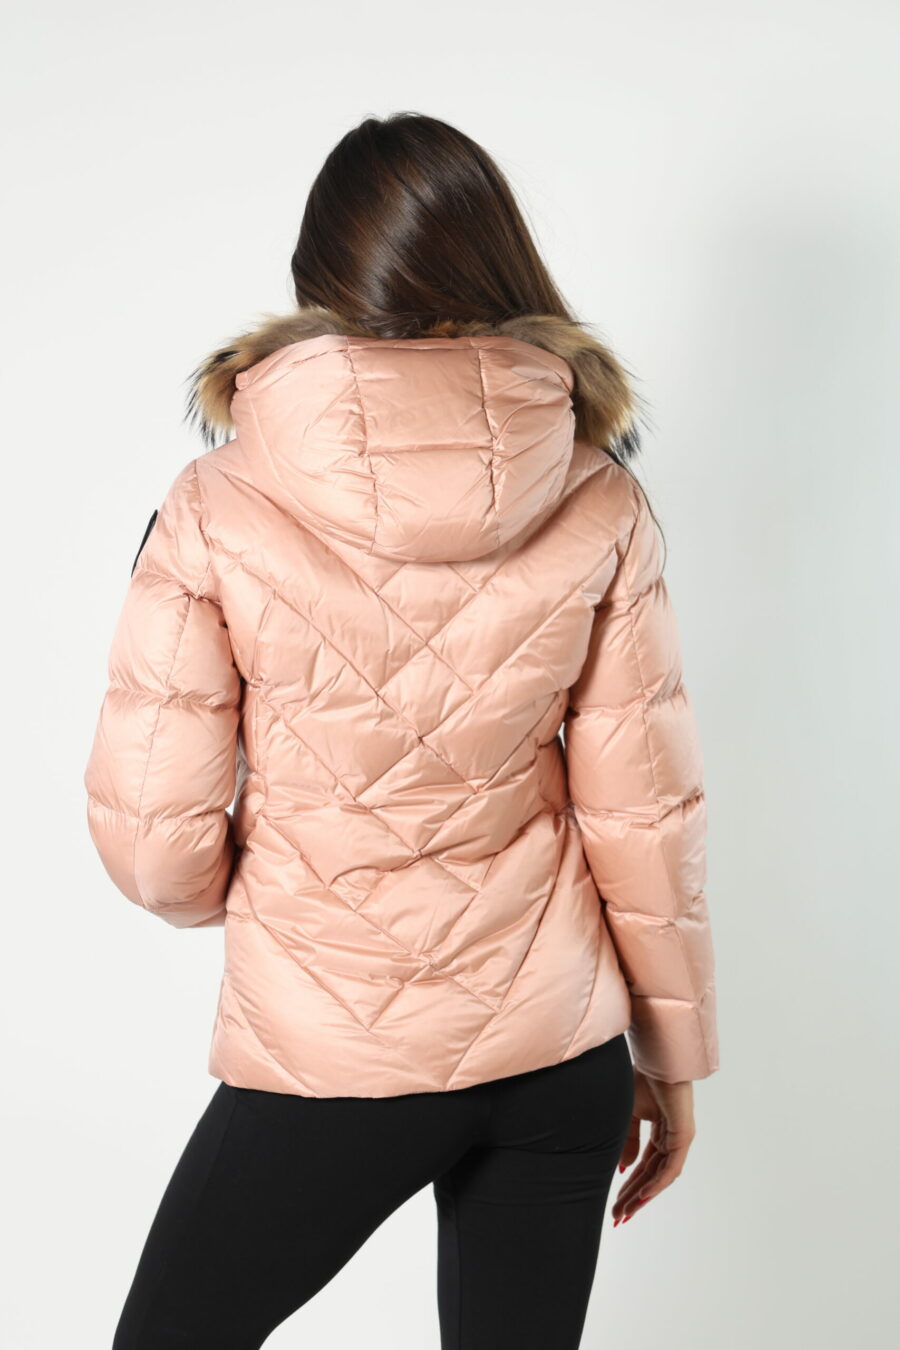 Pale pink hooded jacket with fur hood and diagonal lines and violet lining - 8052865435499 110 scaled